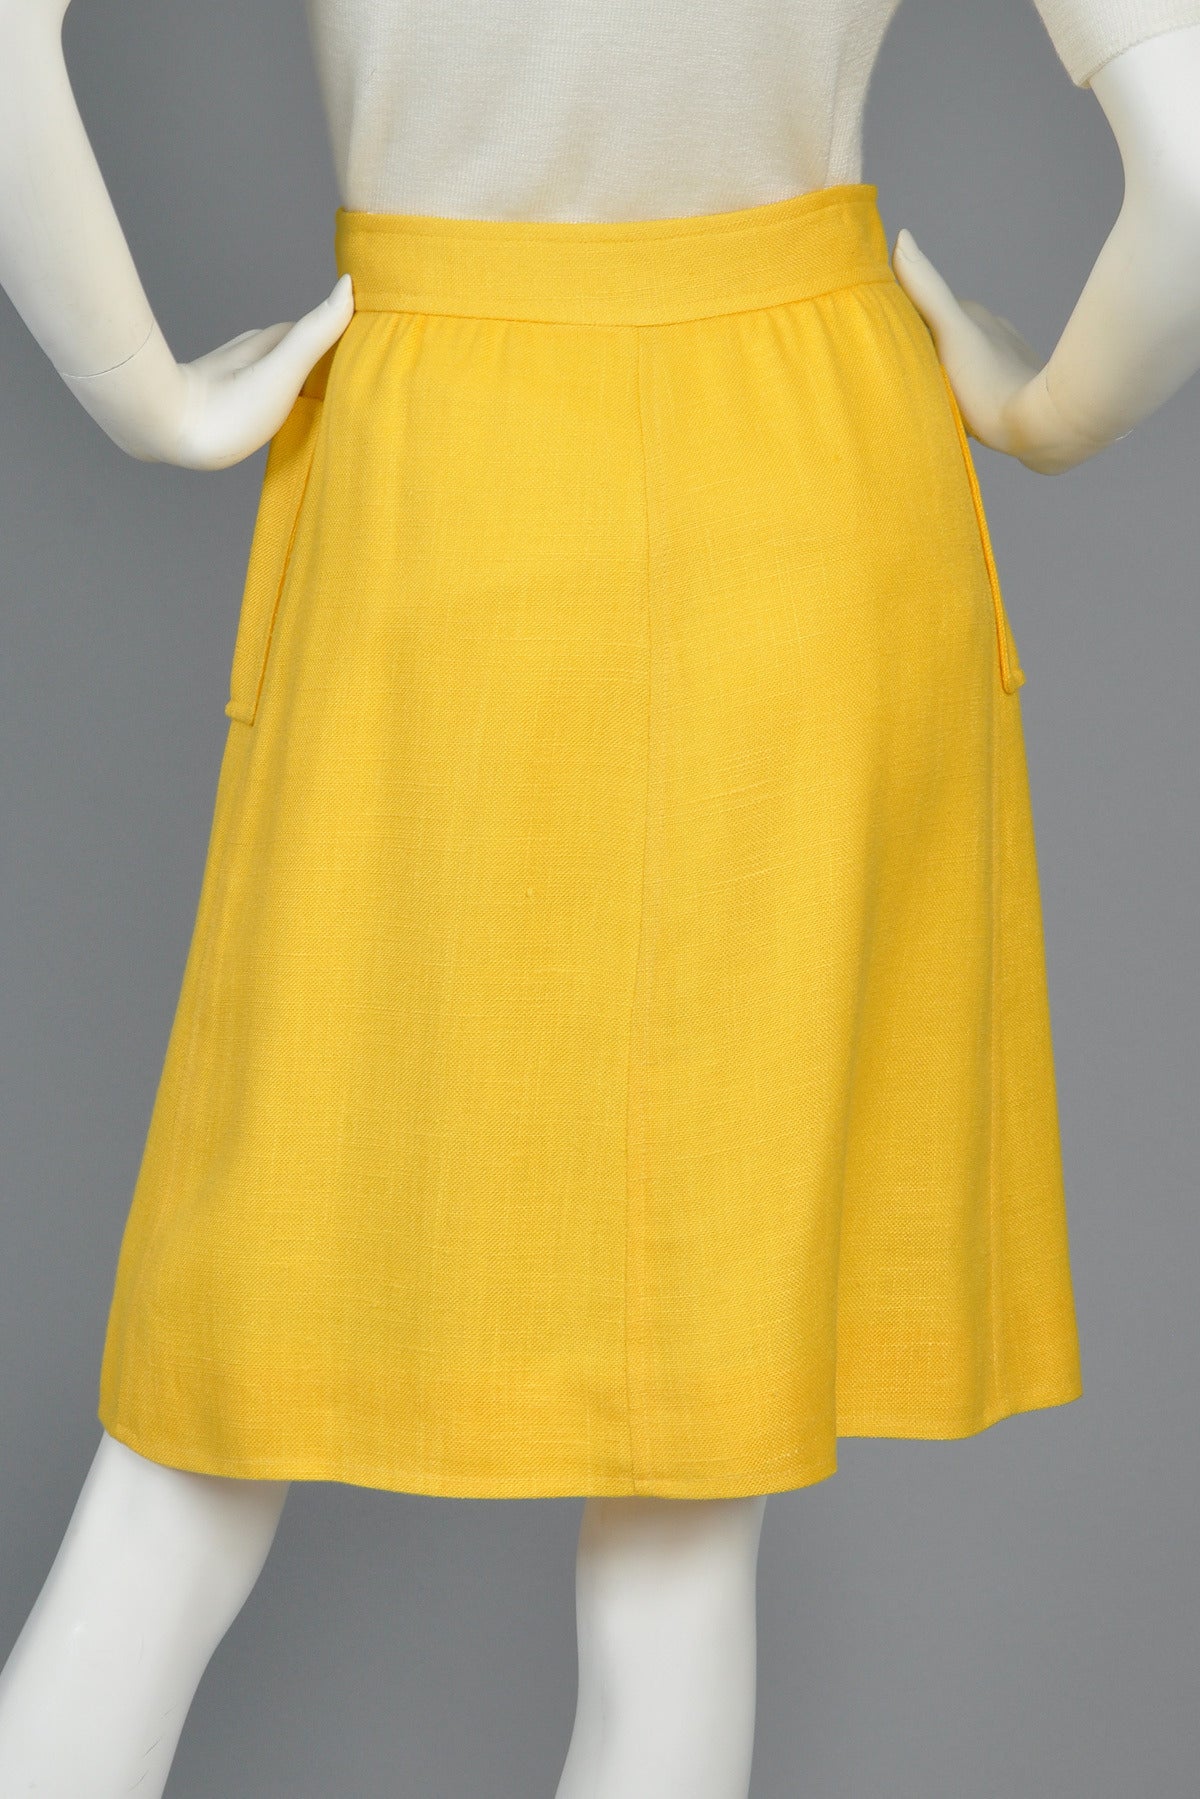 1960s Courrèges Numbered Snap-Front Yellow Skirt 2